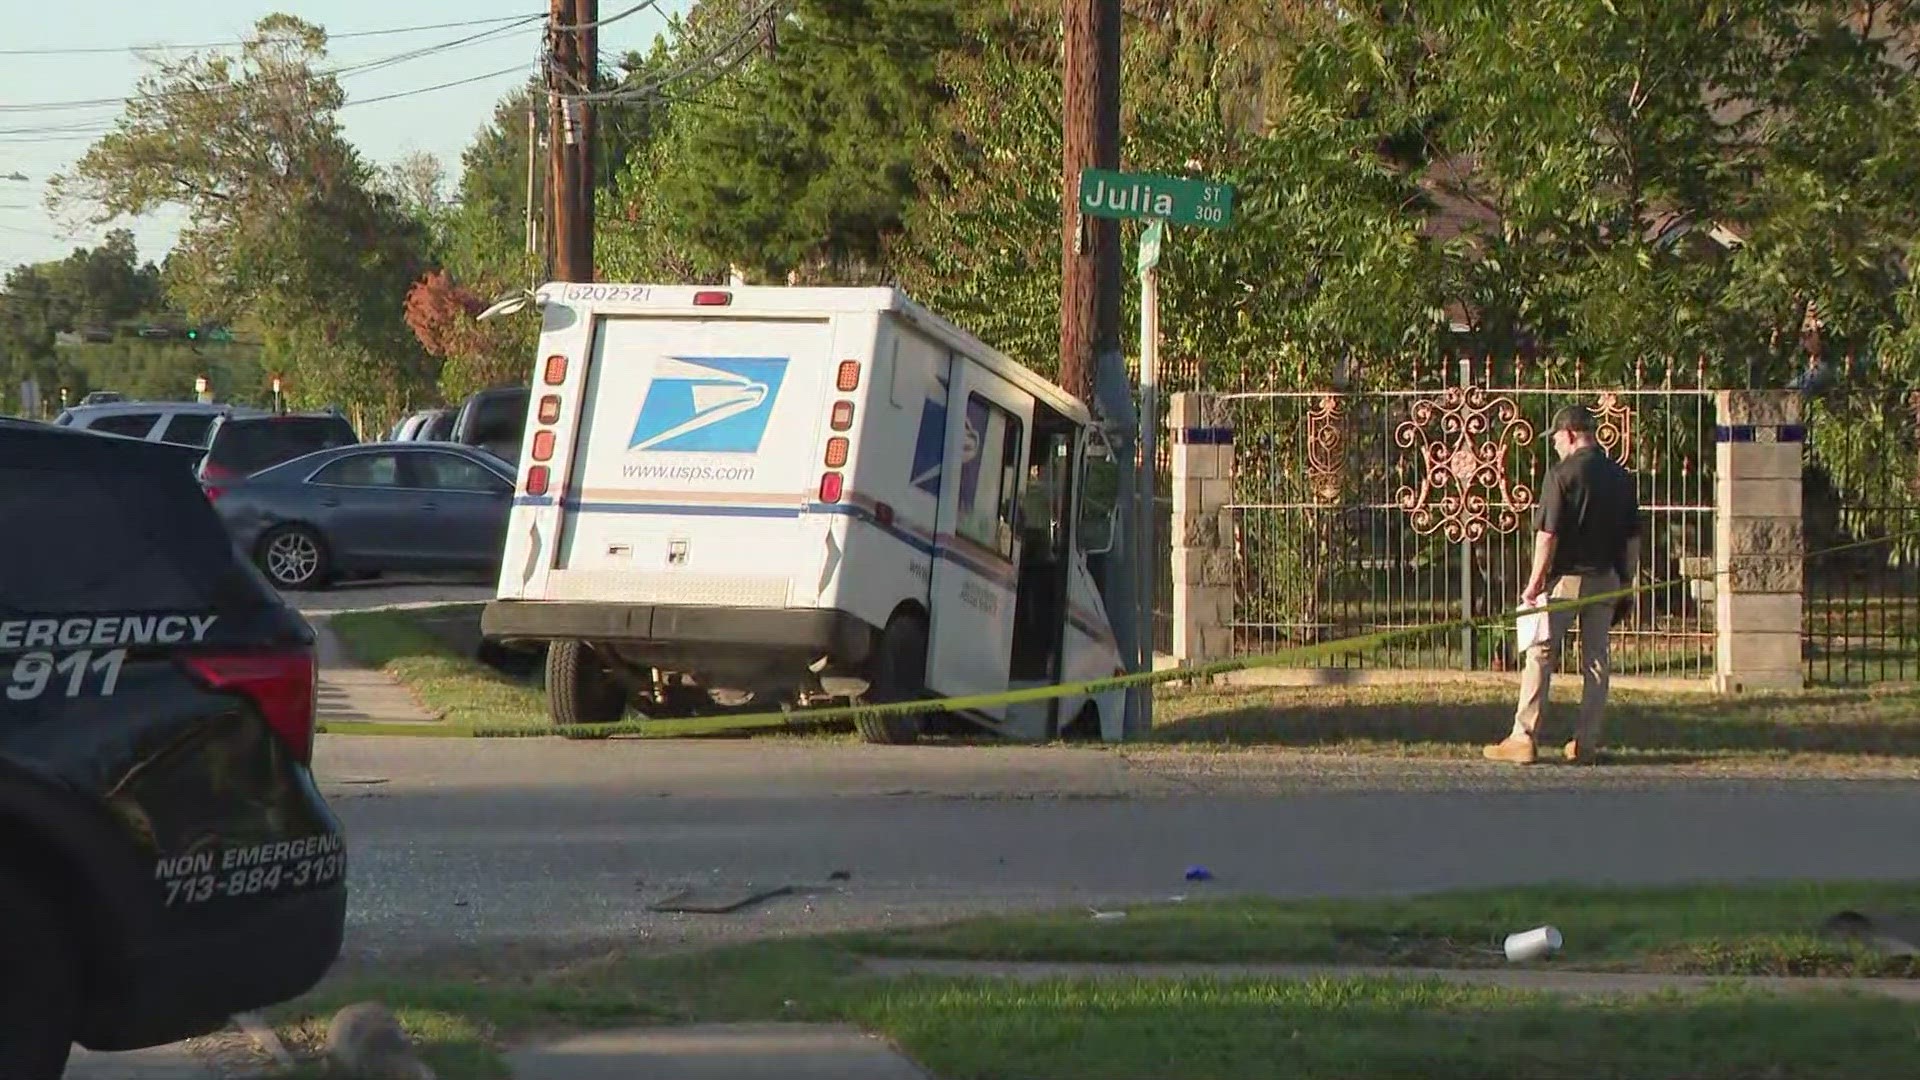 Houston police said the crash involved a stolen vehicle. The identity of the postal worker has not been released.